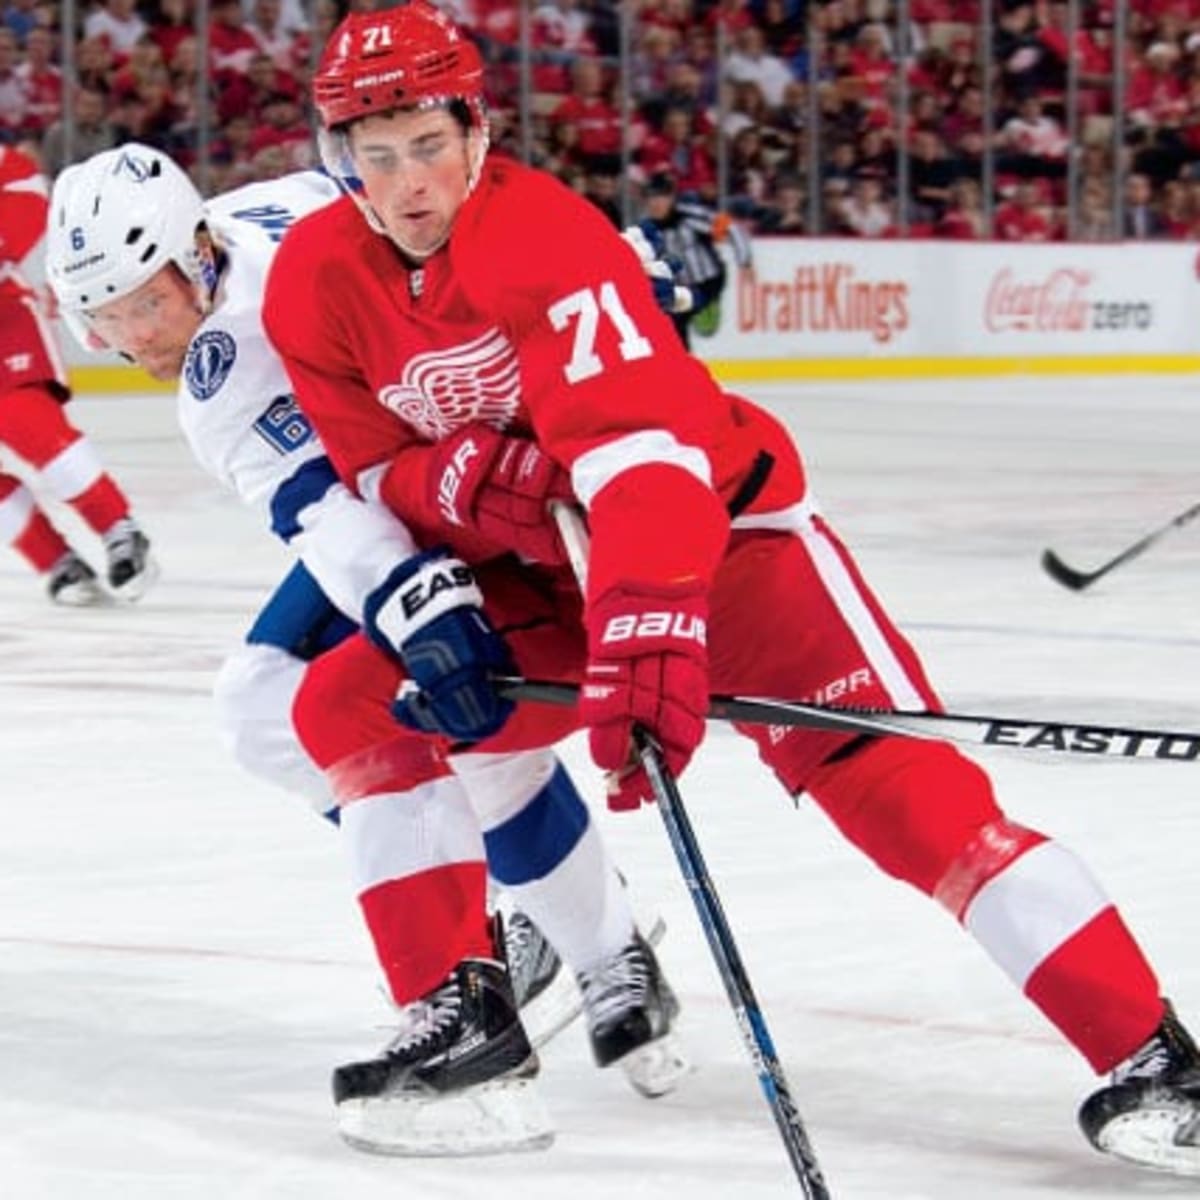 Detroit Red Wings' Dylan Larkin wins bronze at worlds; what next?